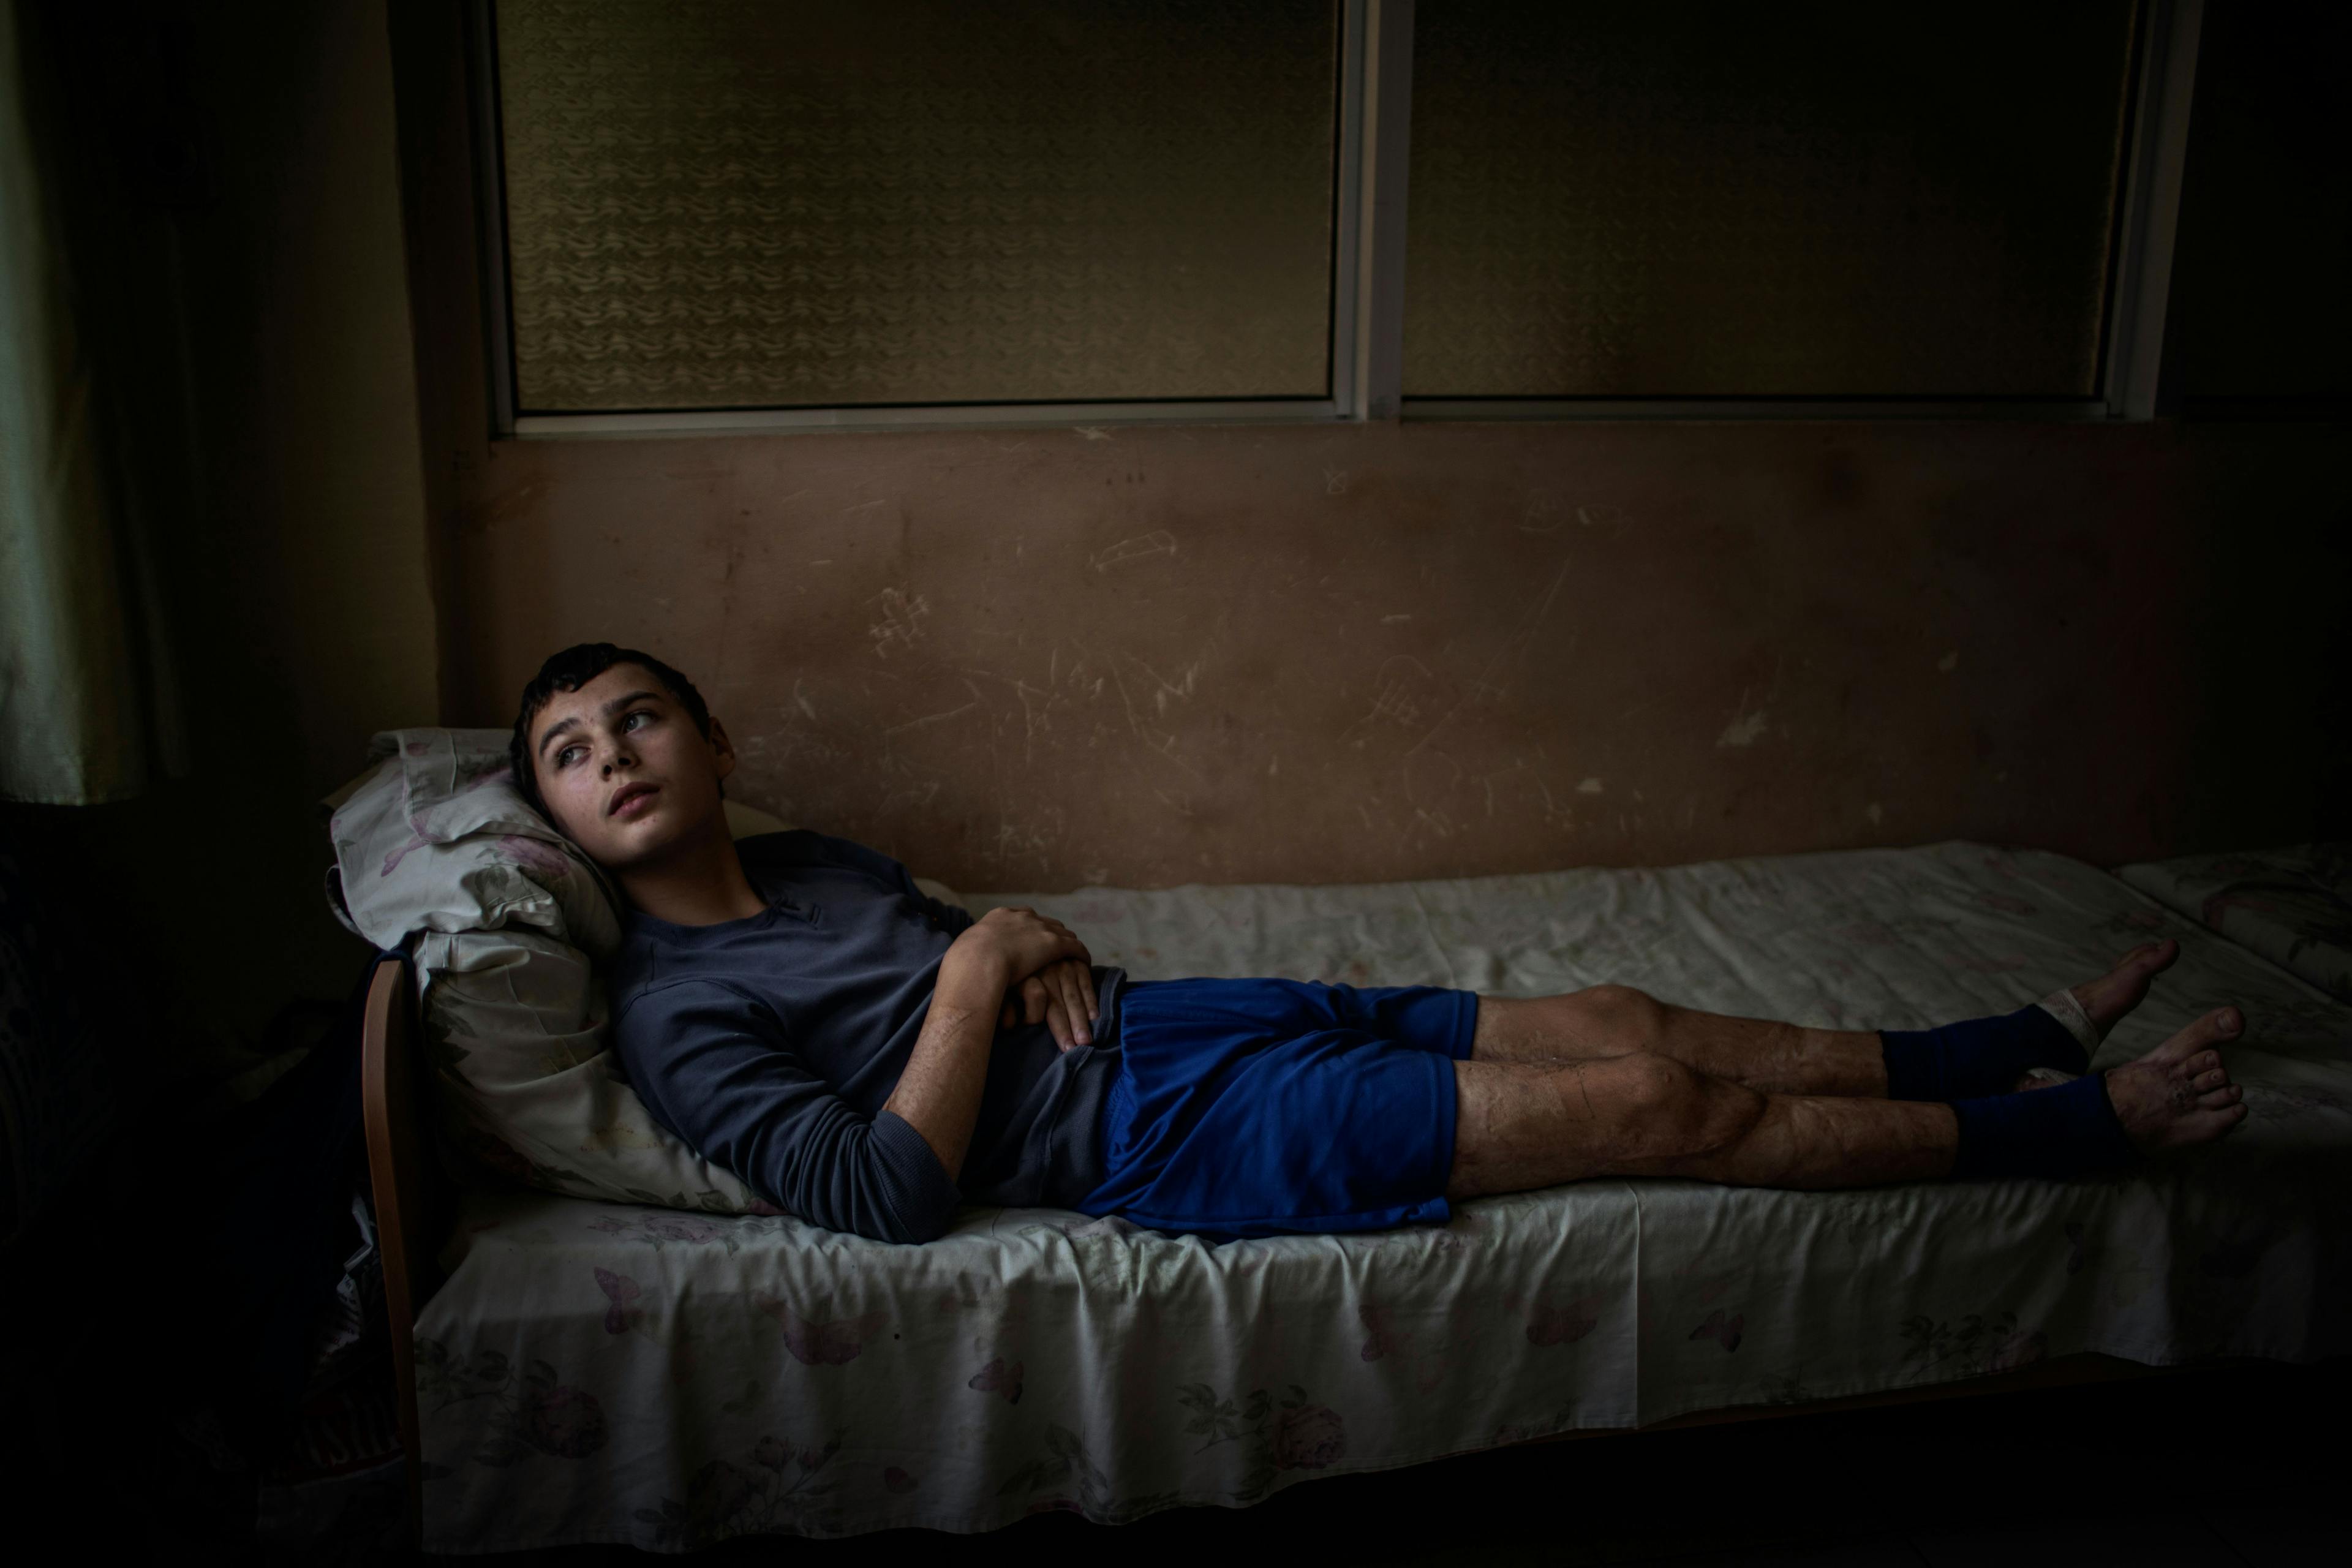 On 24 September 2022 in Lviv, Ukraine, 12-year-old Mykhailo Baev looks out a window while resting on a bed at Saint Nicholas Pediatric Hospital.